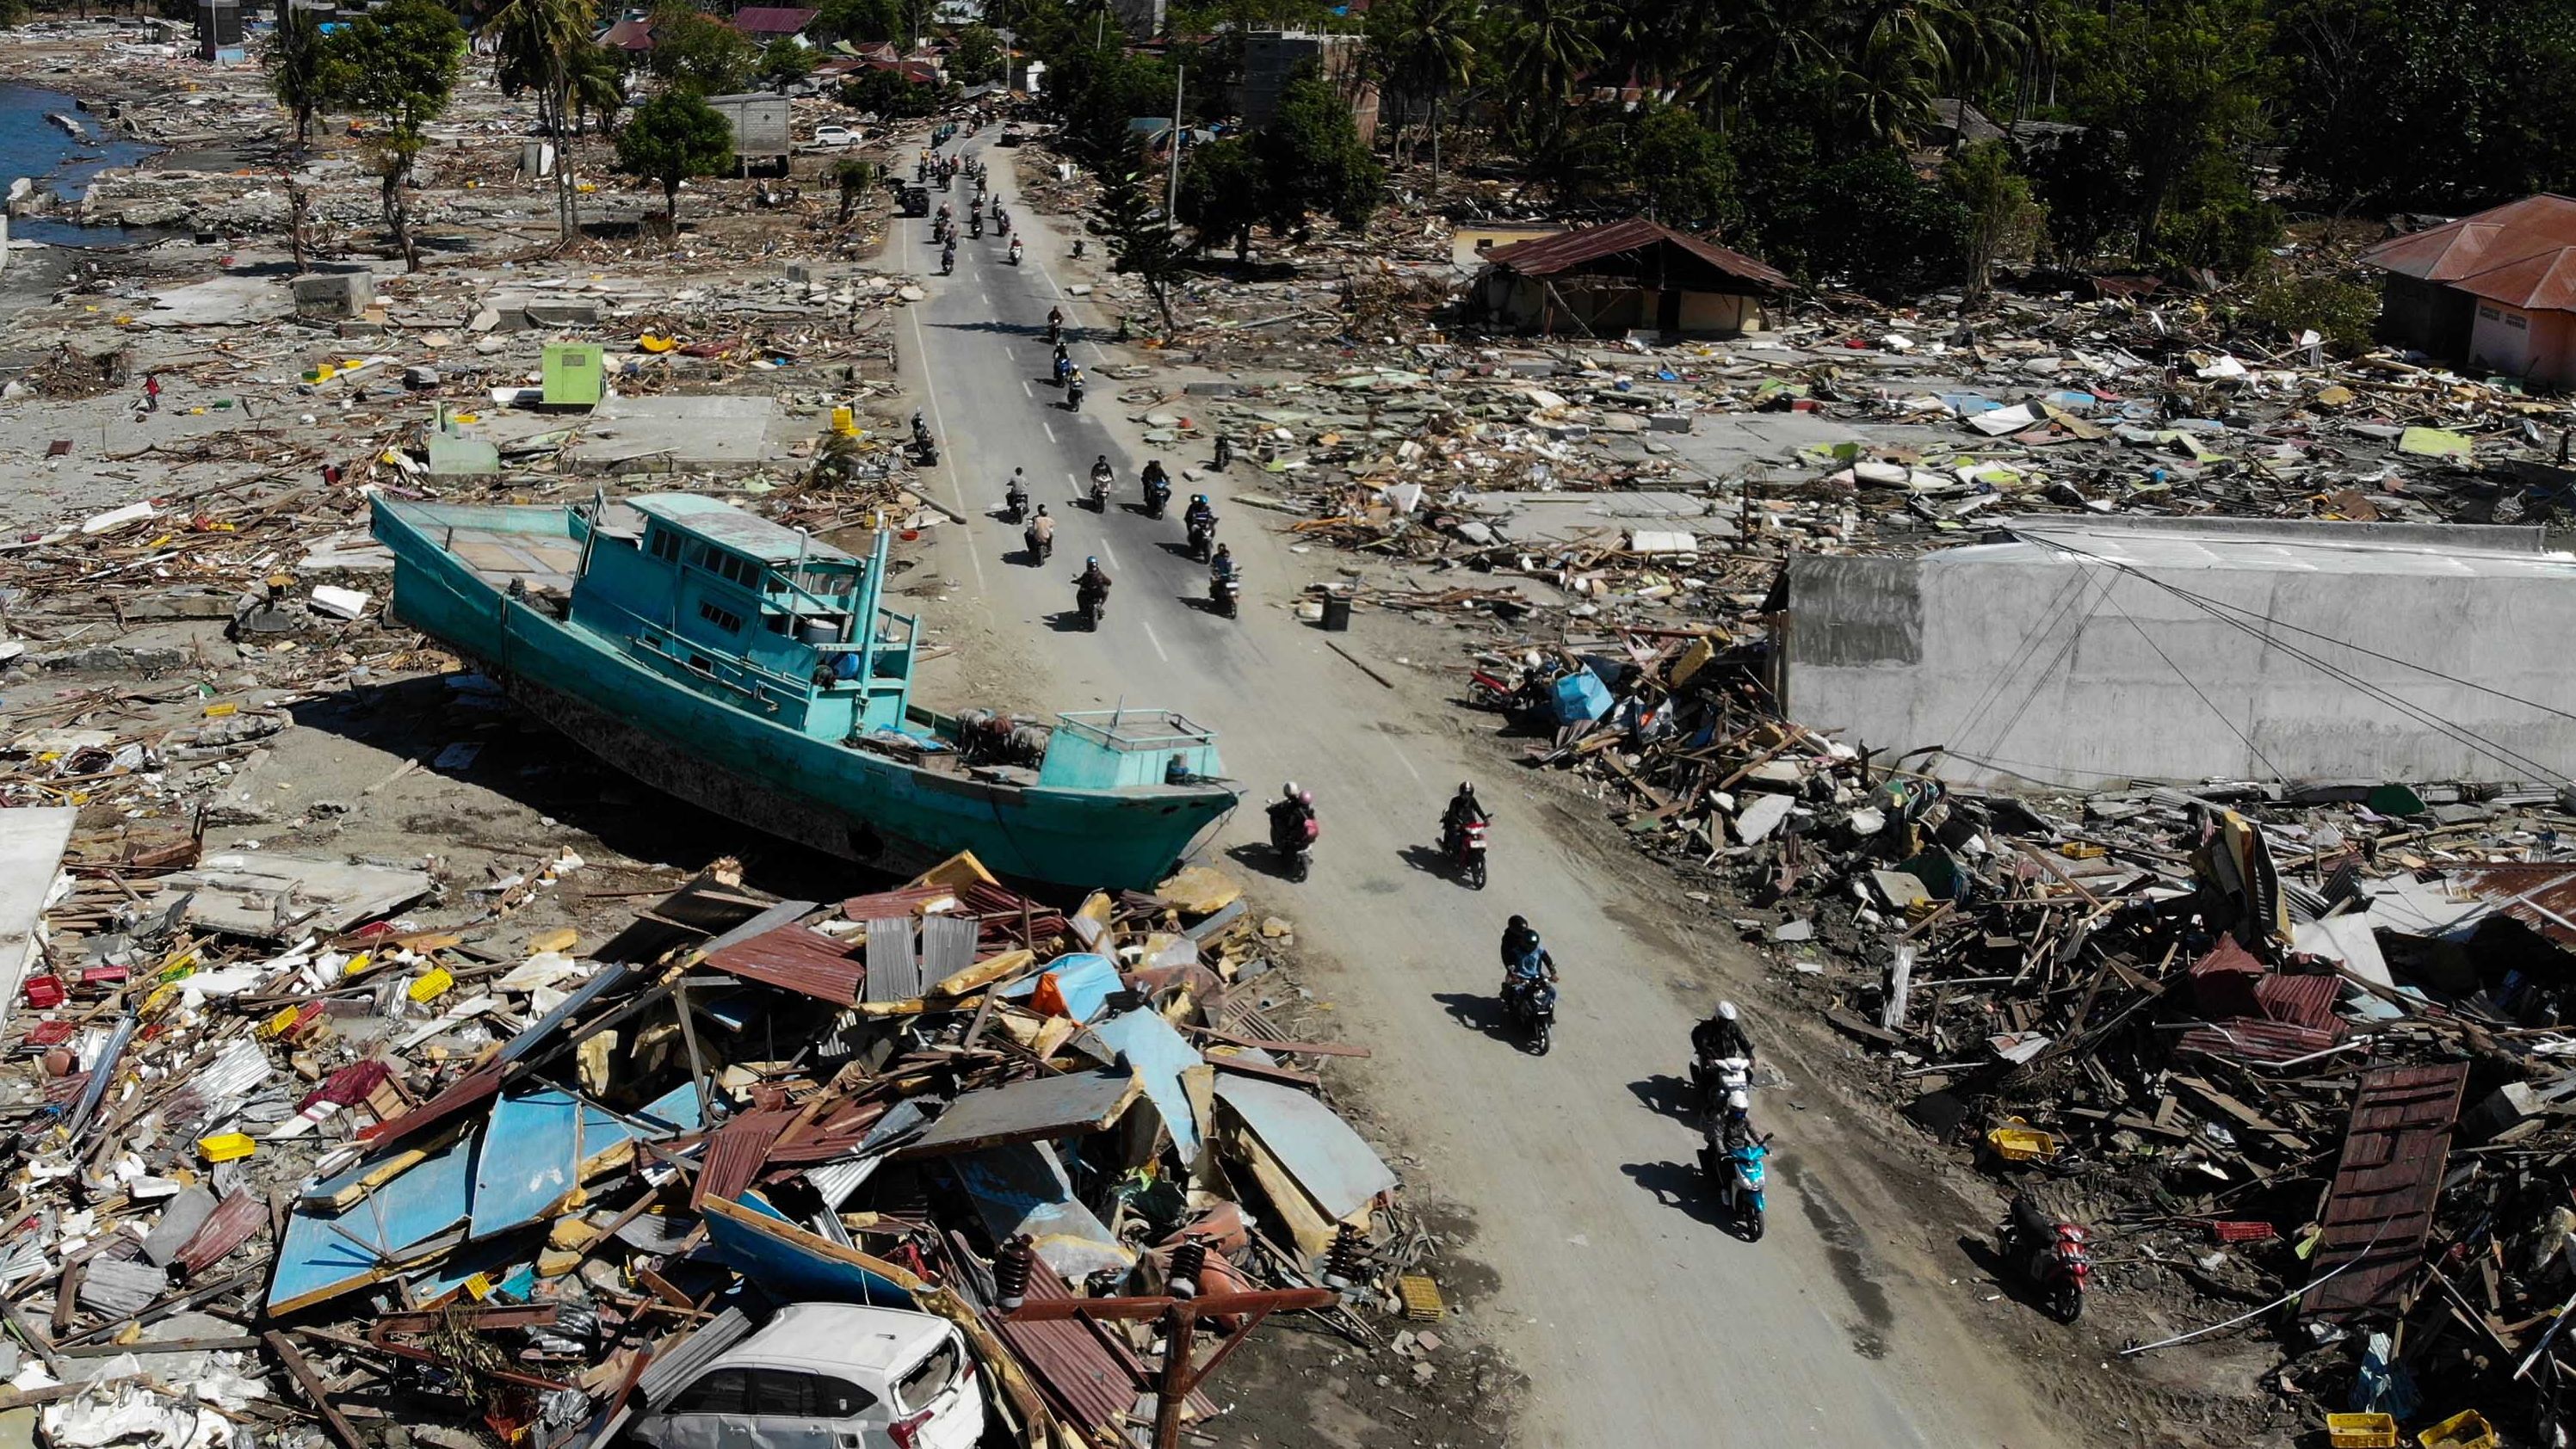 People ride past a boat and other debris in Palu on October 1.